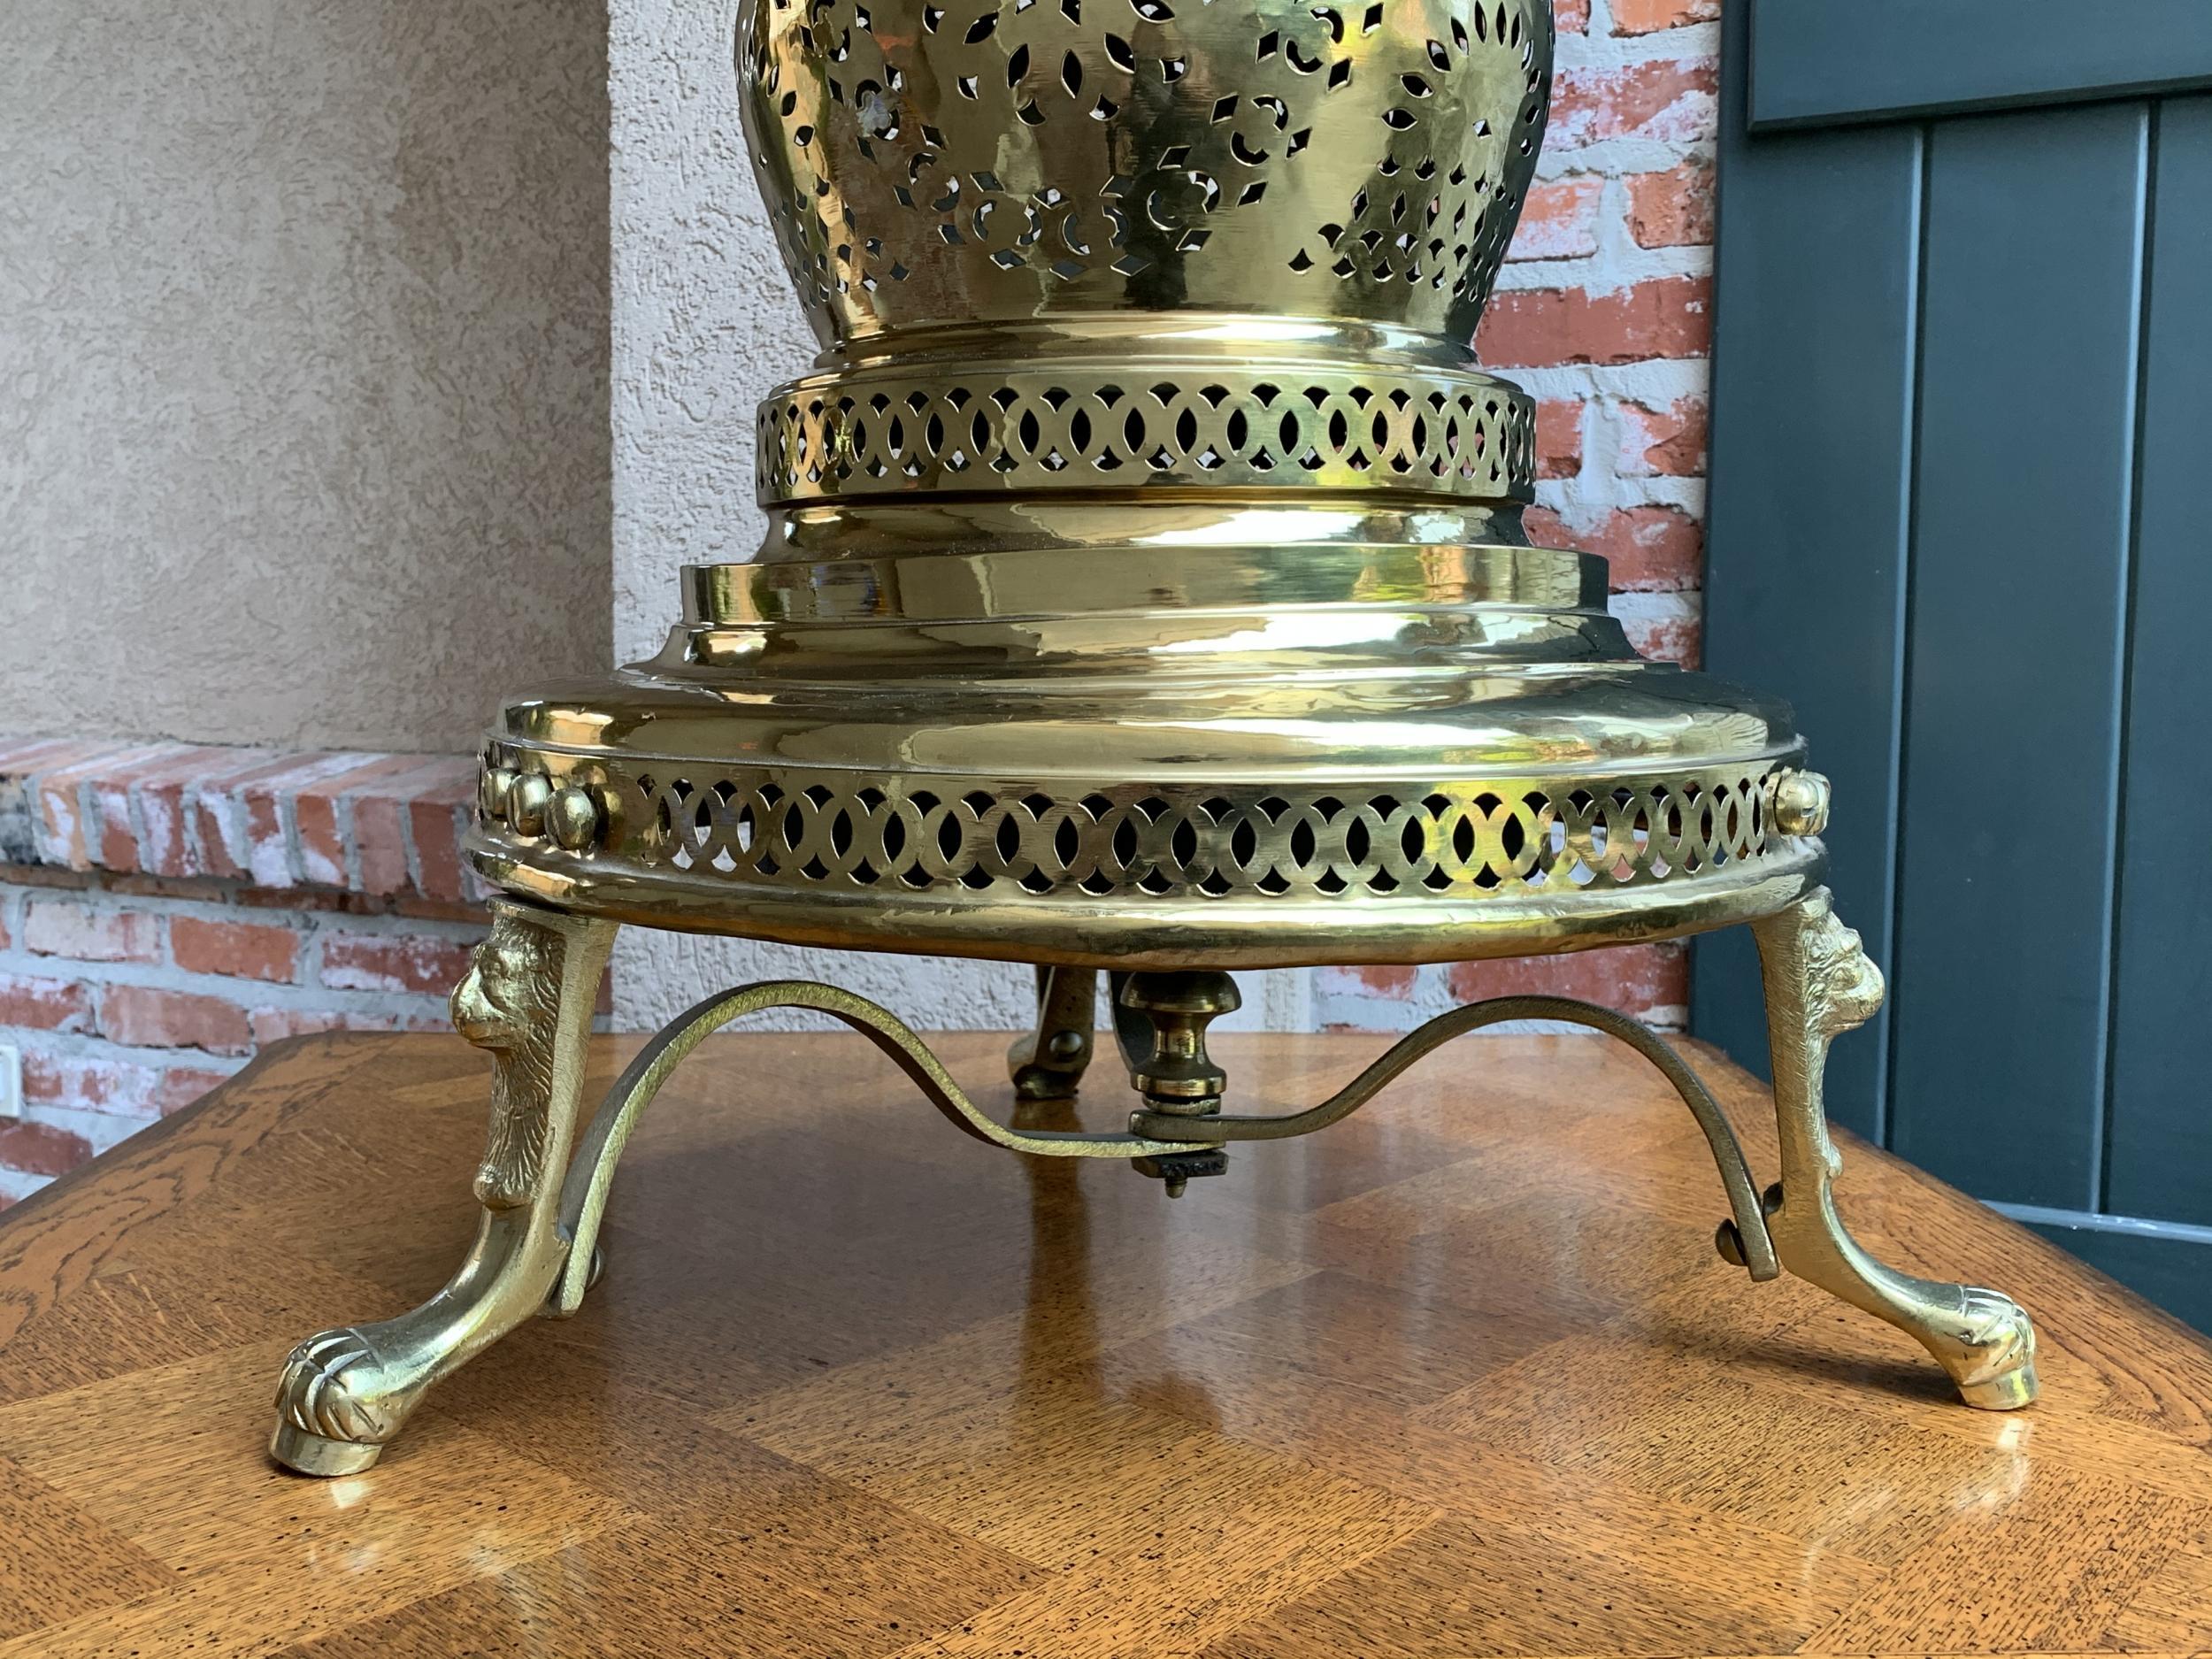 Vintage French Polished Brass Bell Brazier Heater Fire Pit Incense For Sale 1